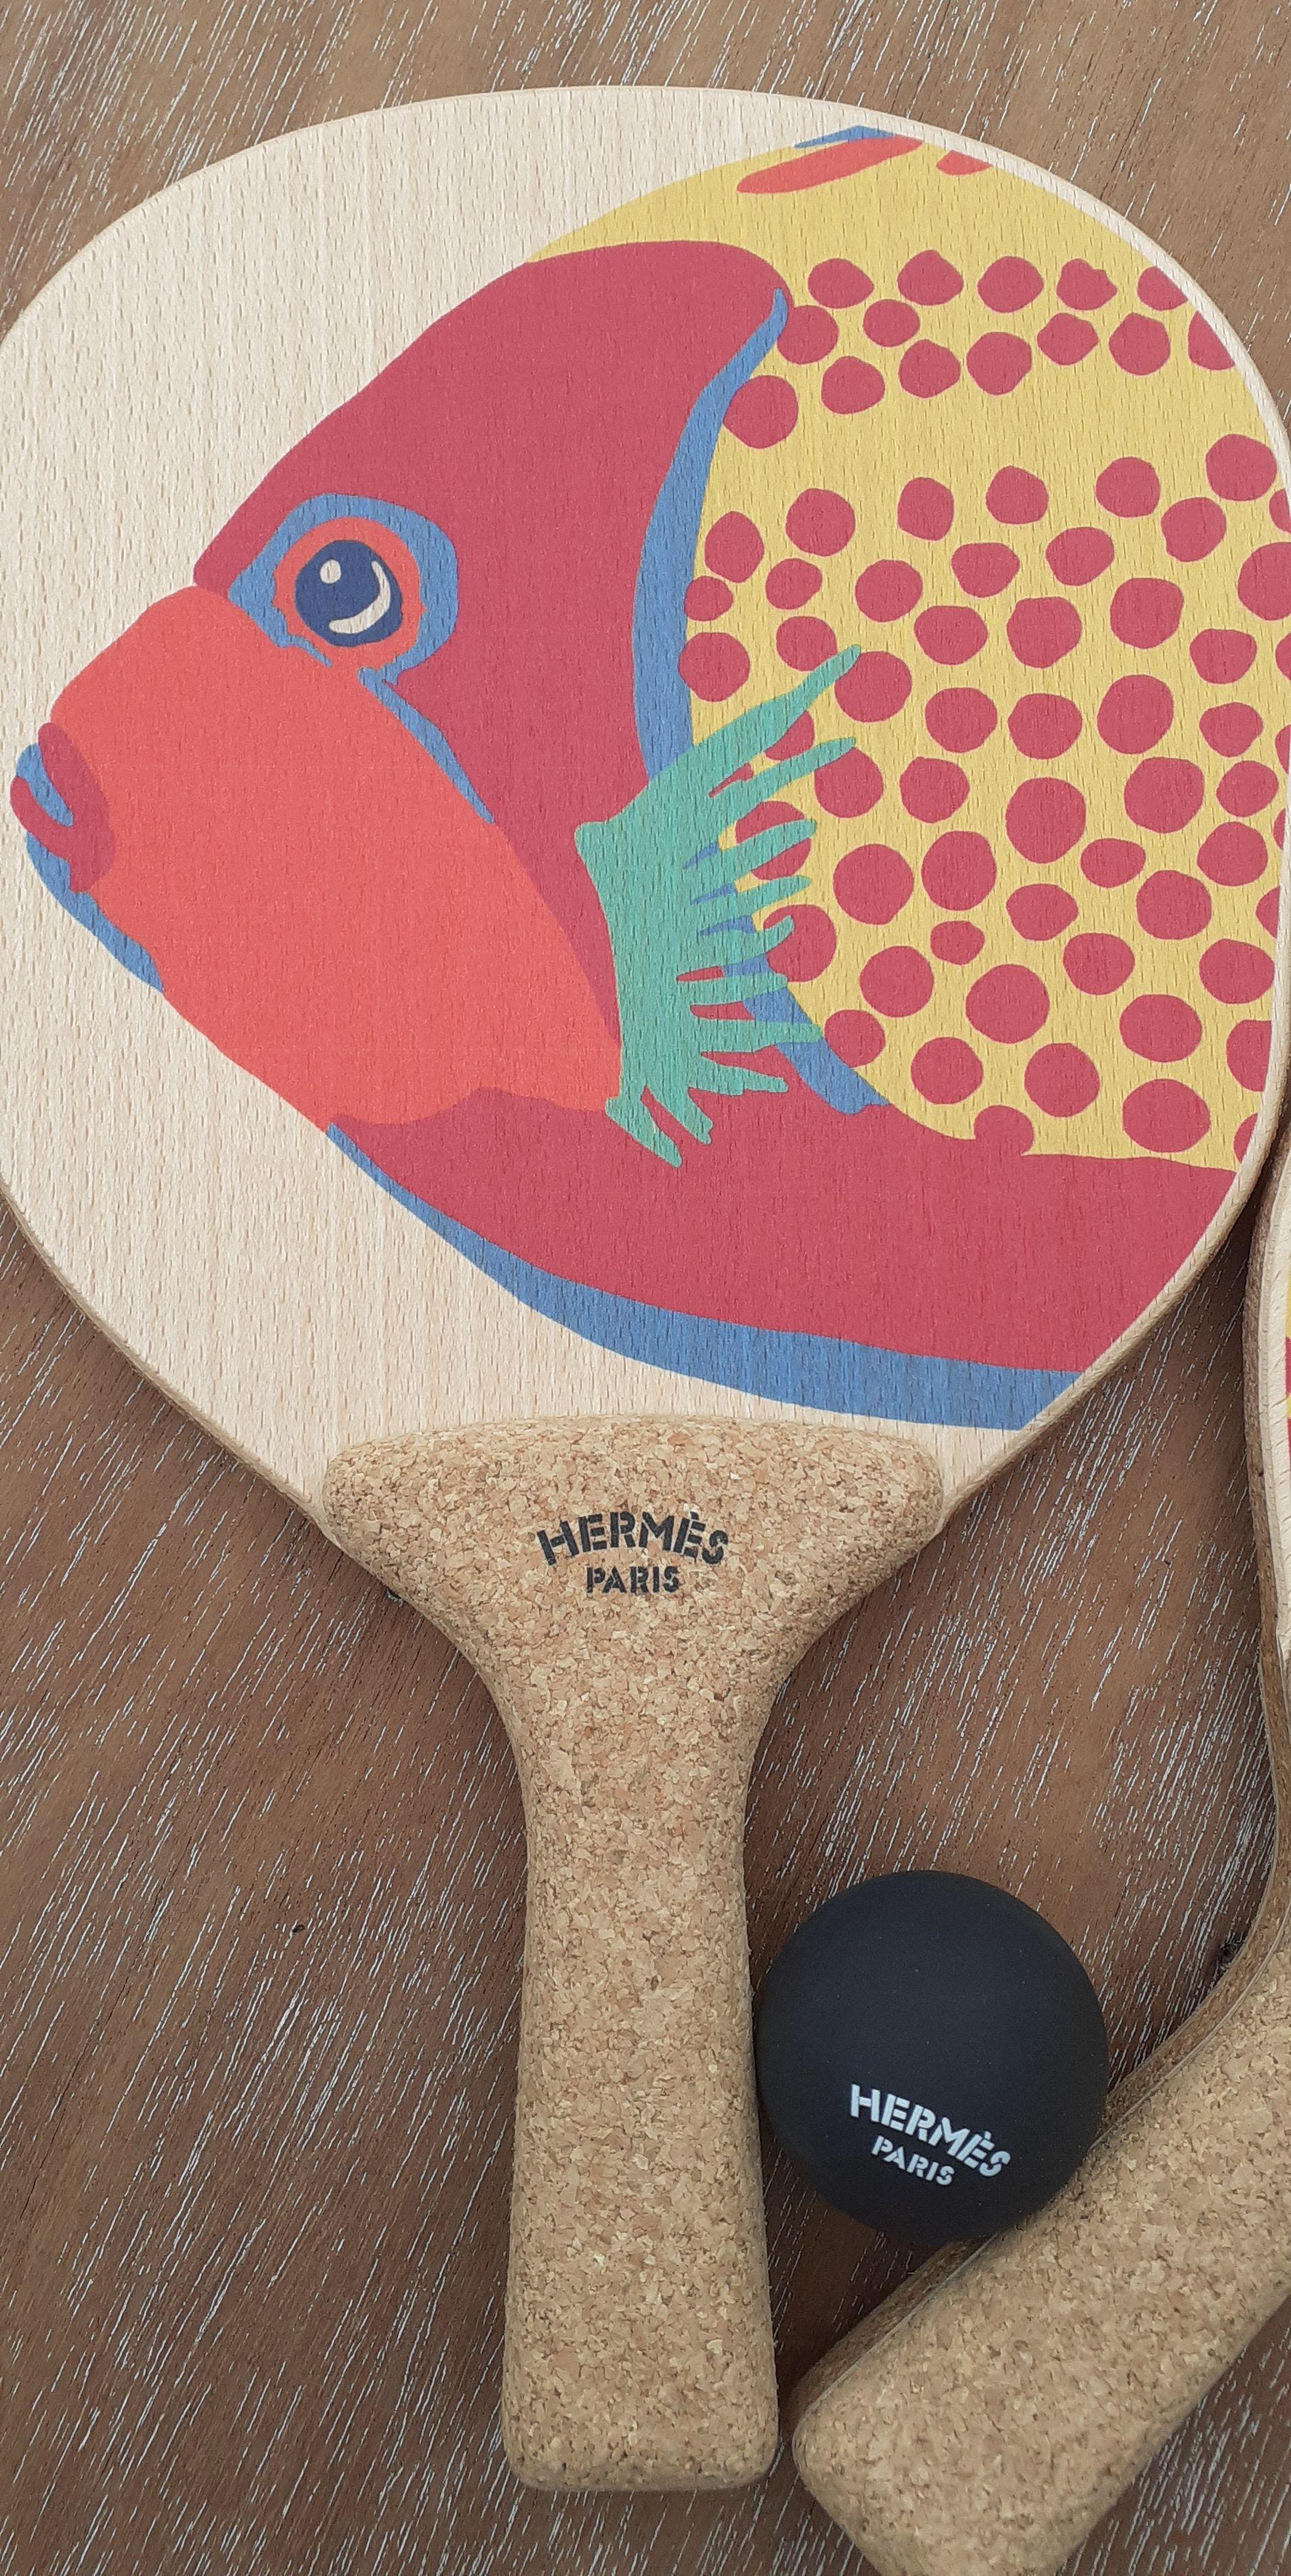 Cute Authentic Set of 2 Hermès Beach Rackets

The set includes 2 rackets, 1 screened printed rubber ball, dustbag and original box

Print: Under the Waves